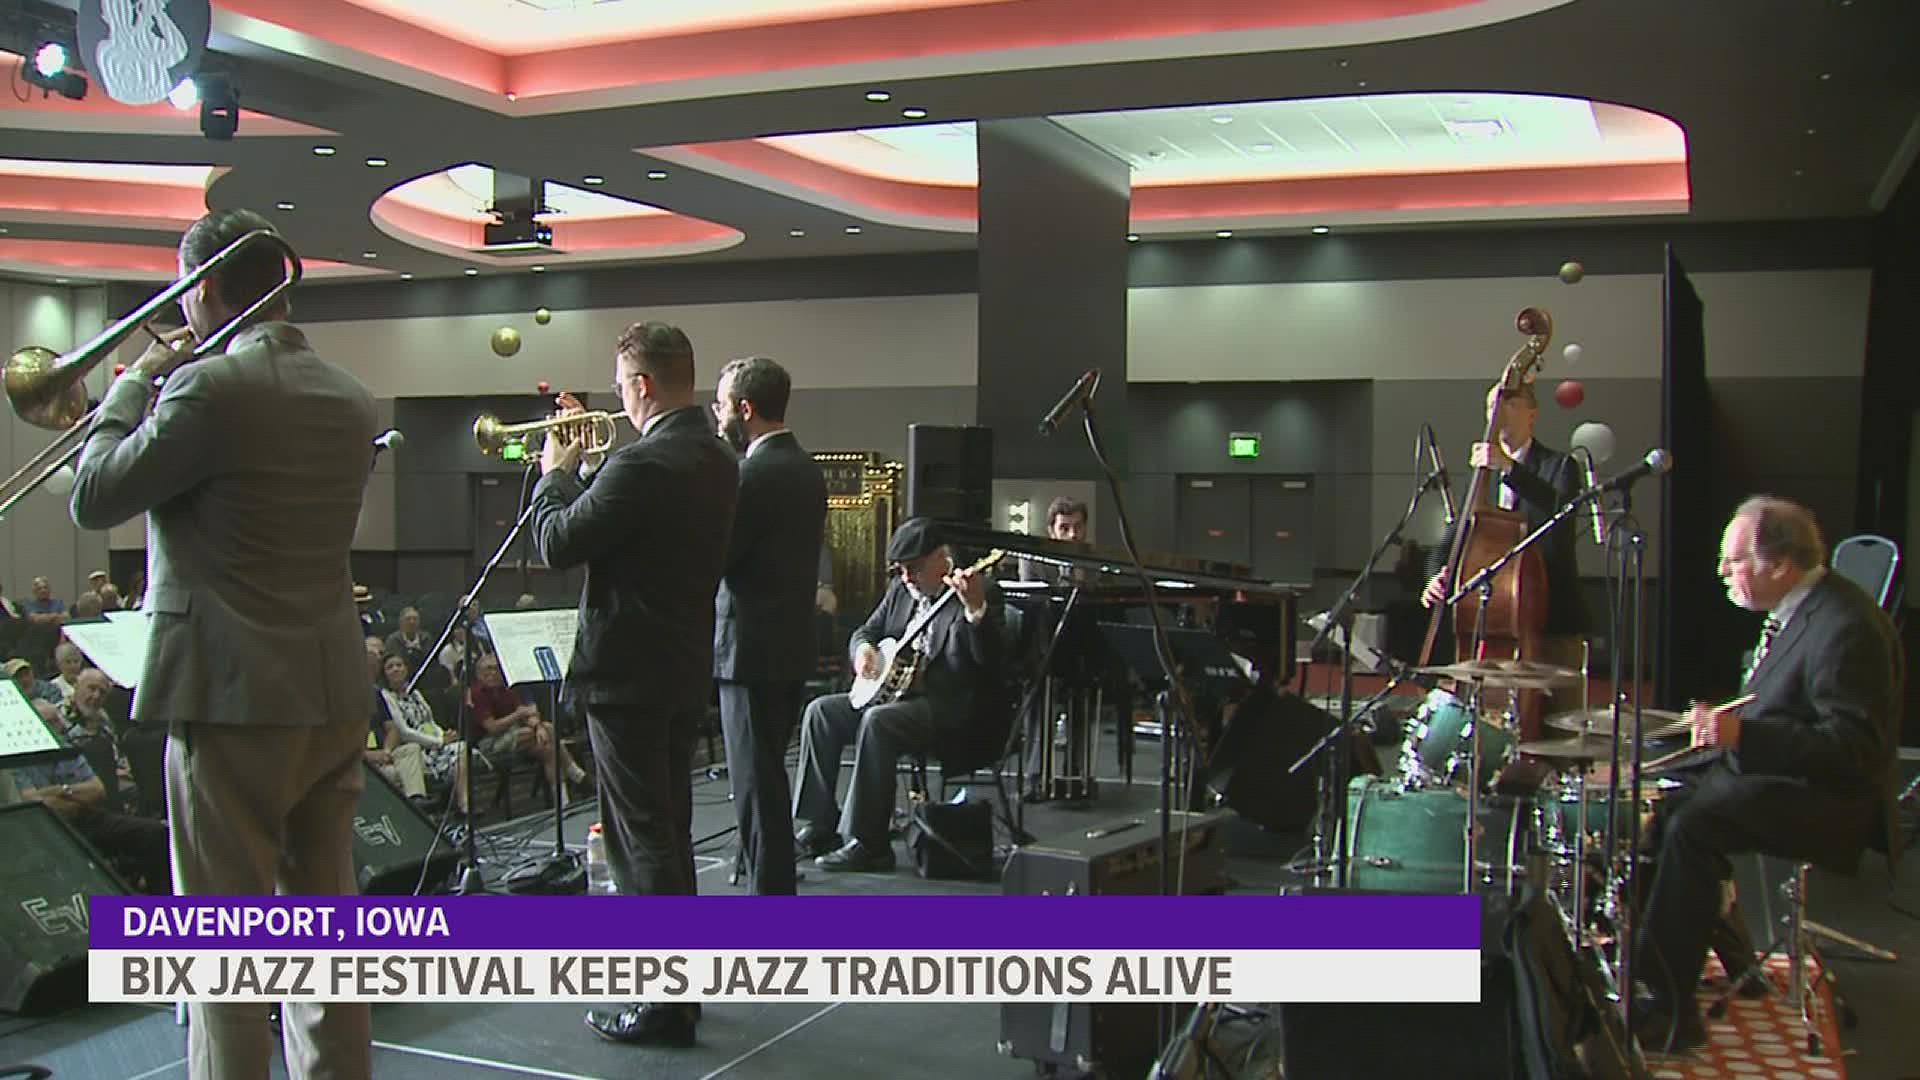 Jazz artists from across the country gathered at Rhythm City Casino for the first day of the Bix Jazz Festival, which lasts through Saturday night.